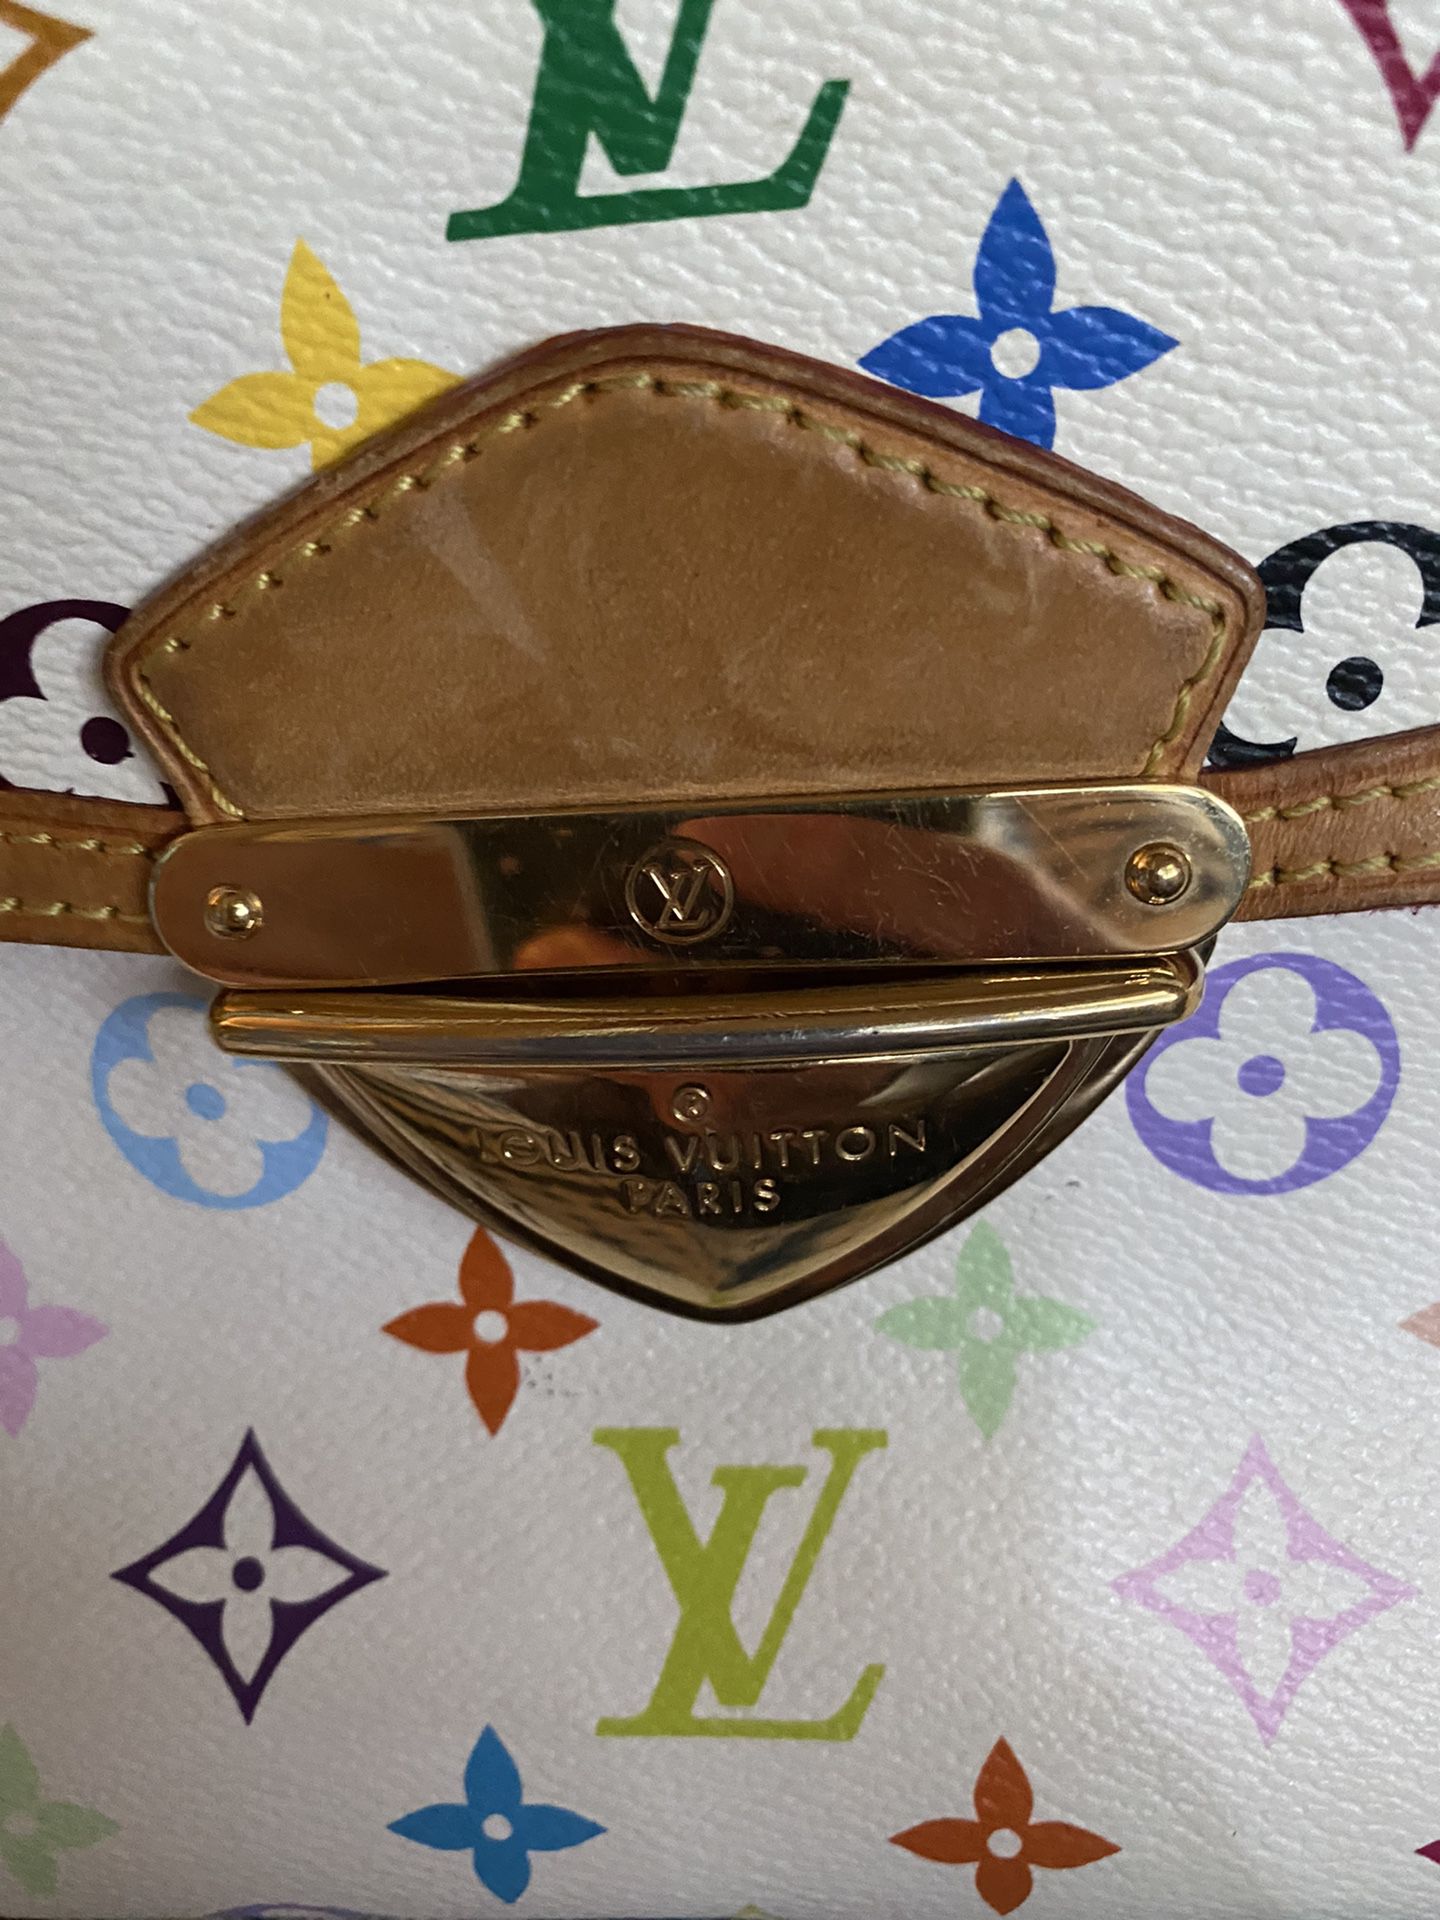 Louis Vuitton Neverfull Limited Edition Murakami for Sale in Morrisville,  NC - OfferUp